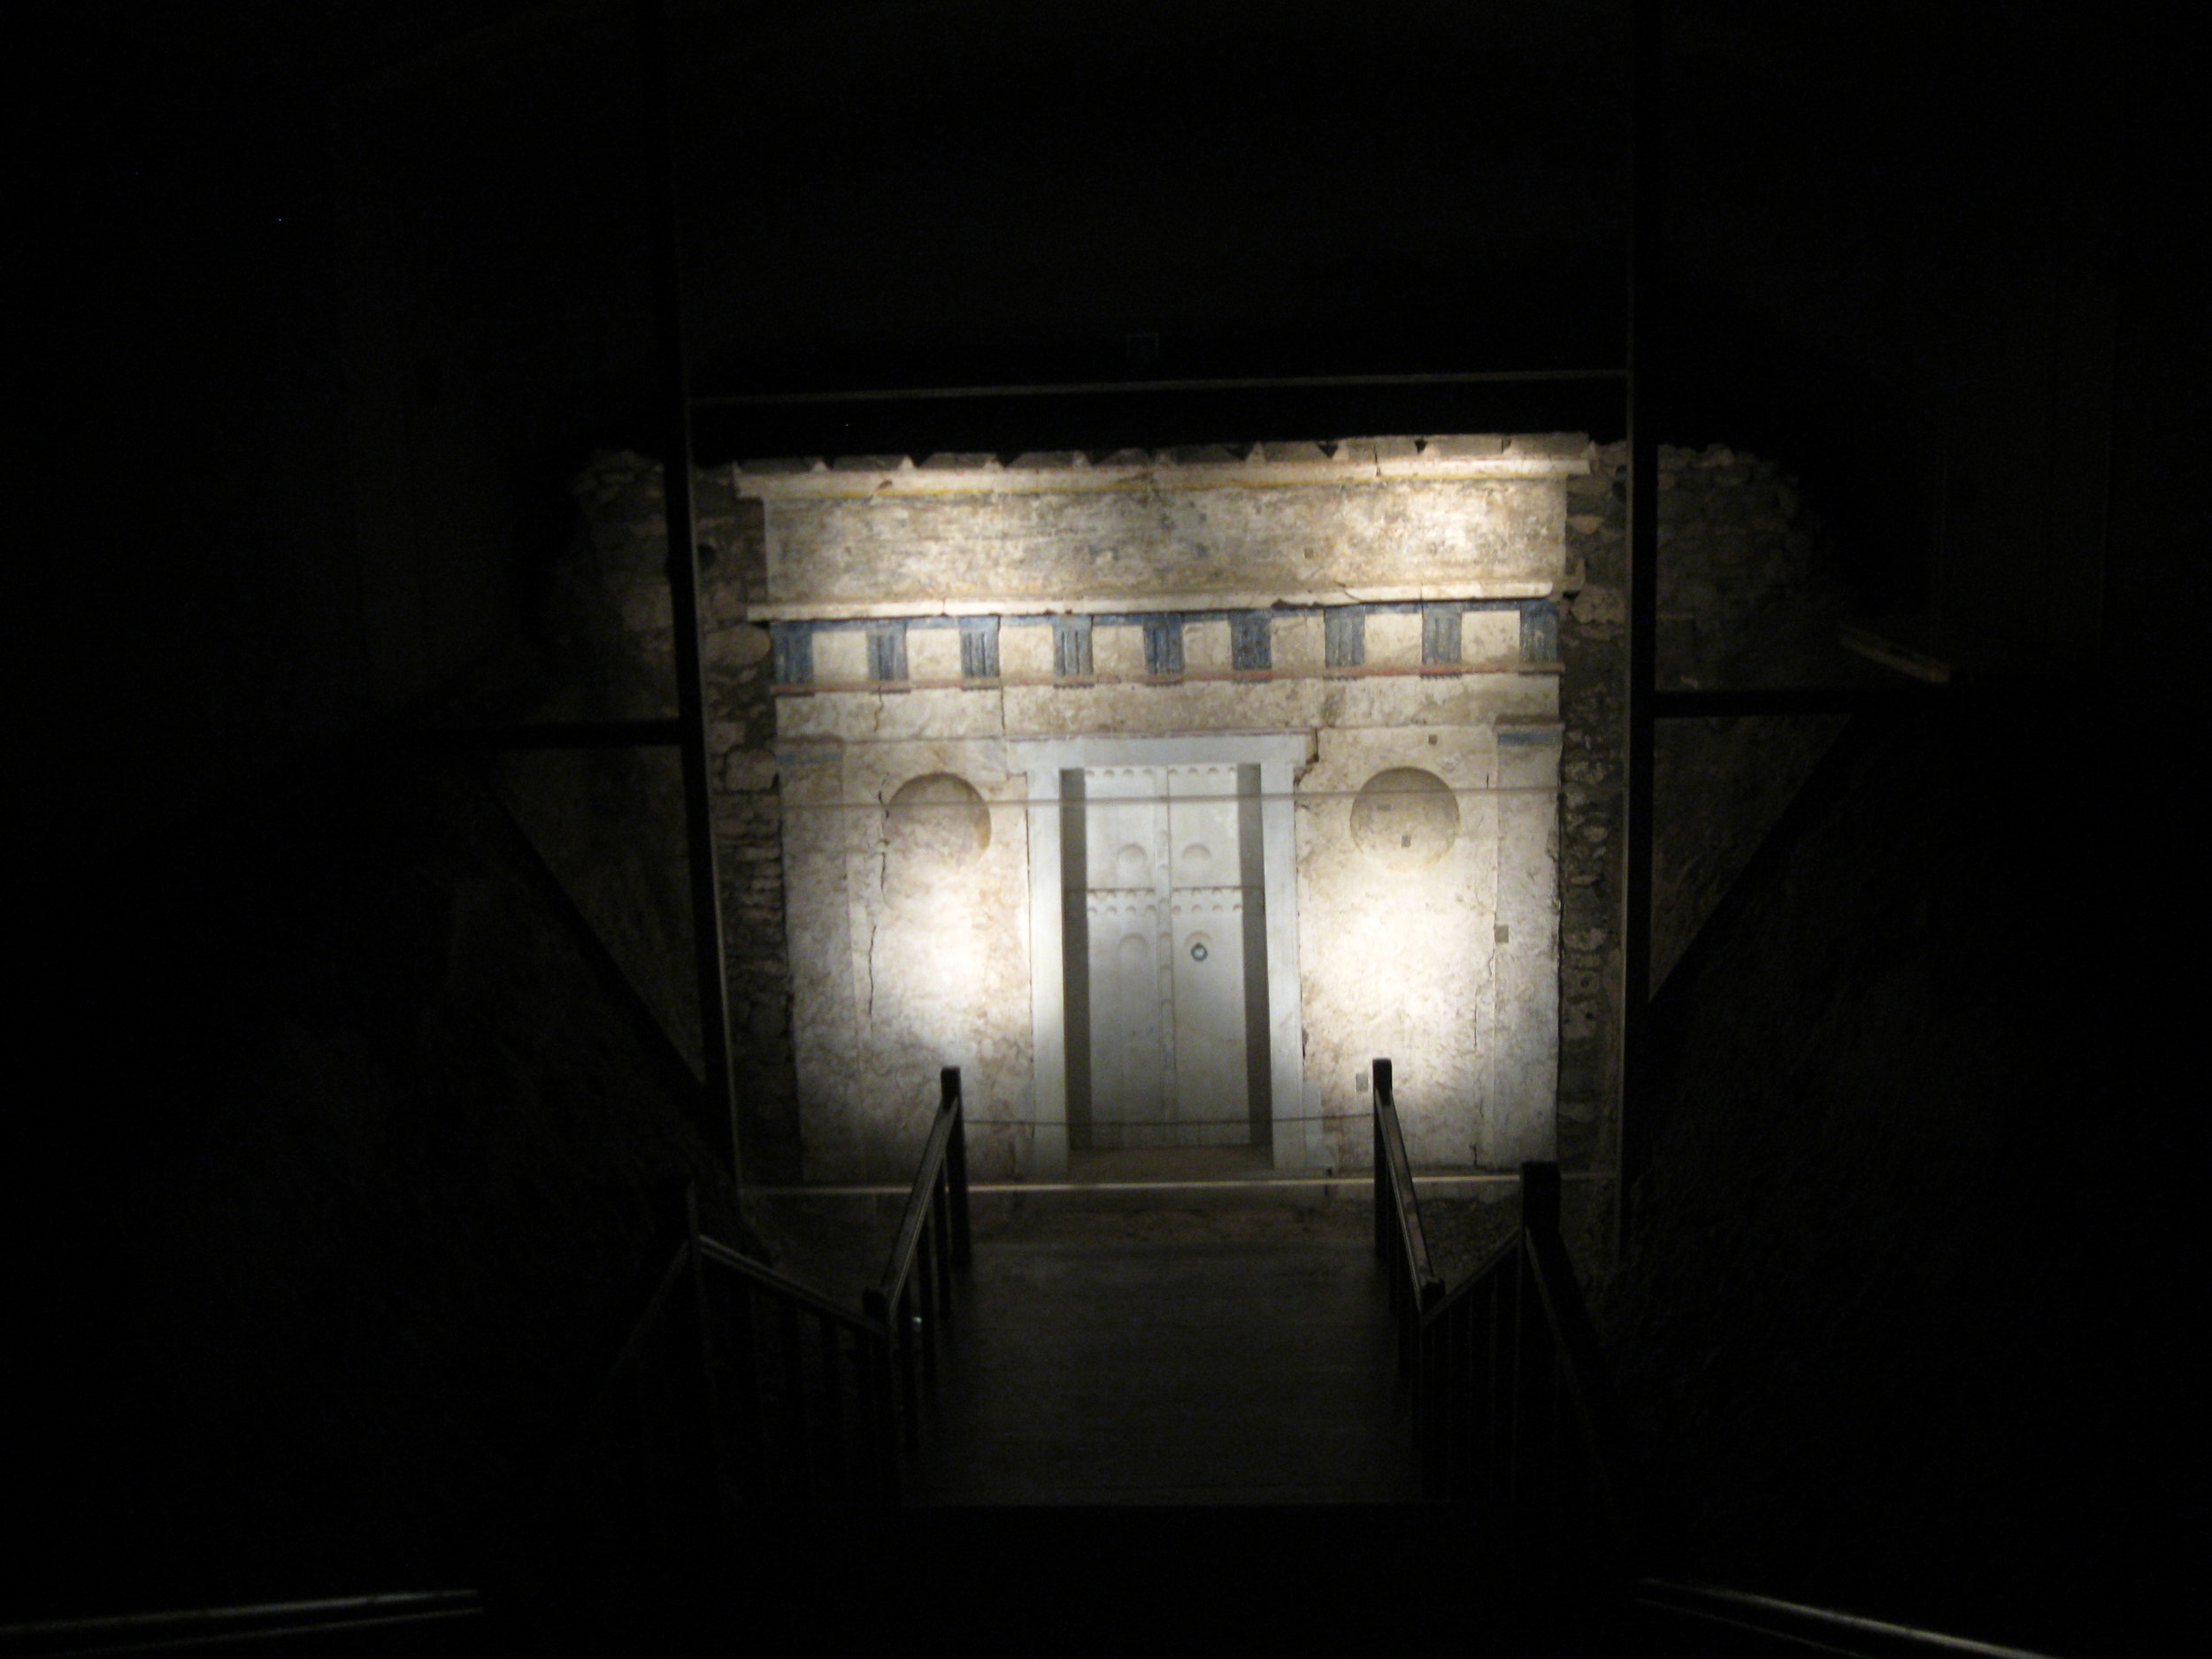 Entrance to Alexander IV’s tomb. Photographs by Georgette Gouveia.